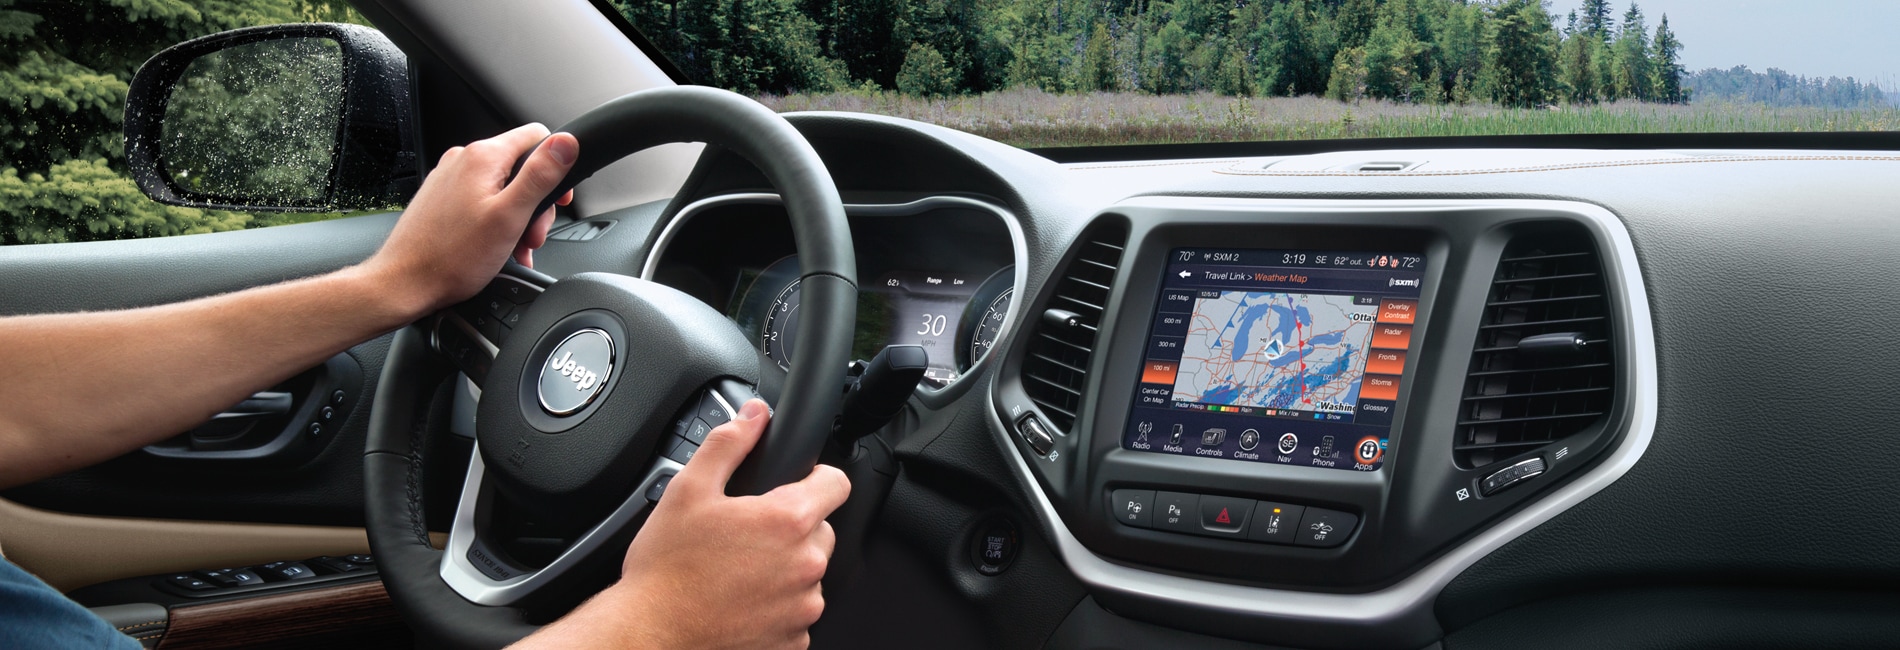 A person holding the steering wheel of a new Jeep Cherokee, the center are of the dash is displaying a map. They are driving in a forest type location.